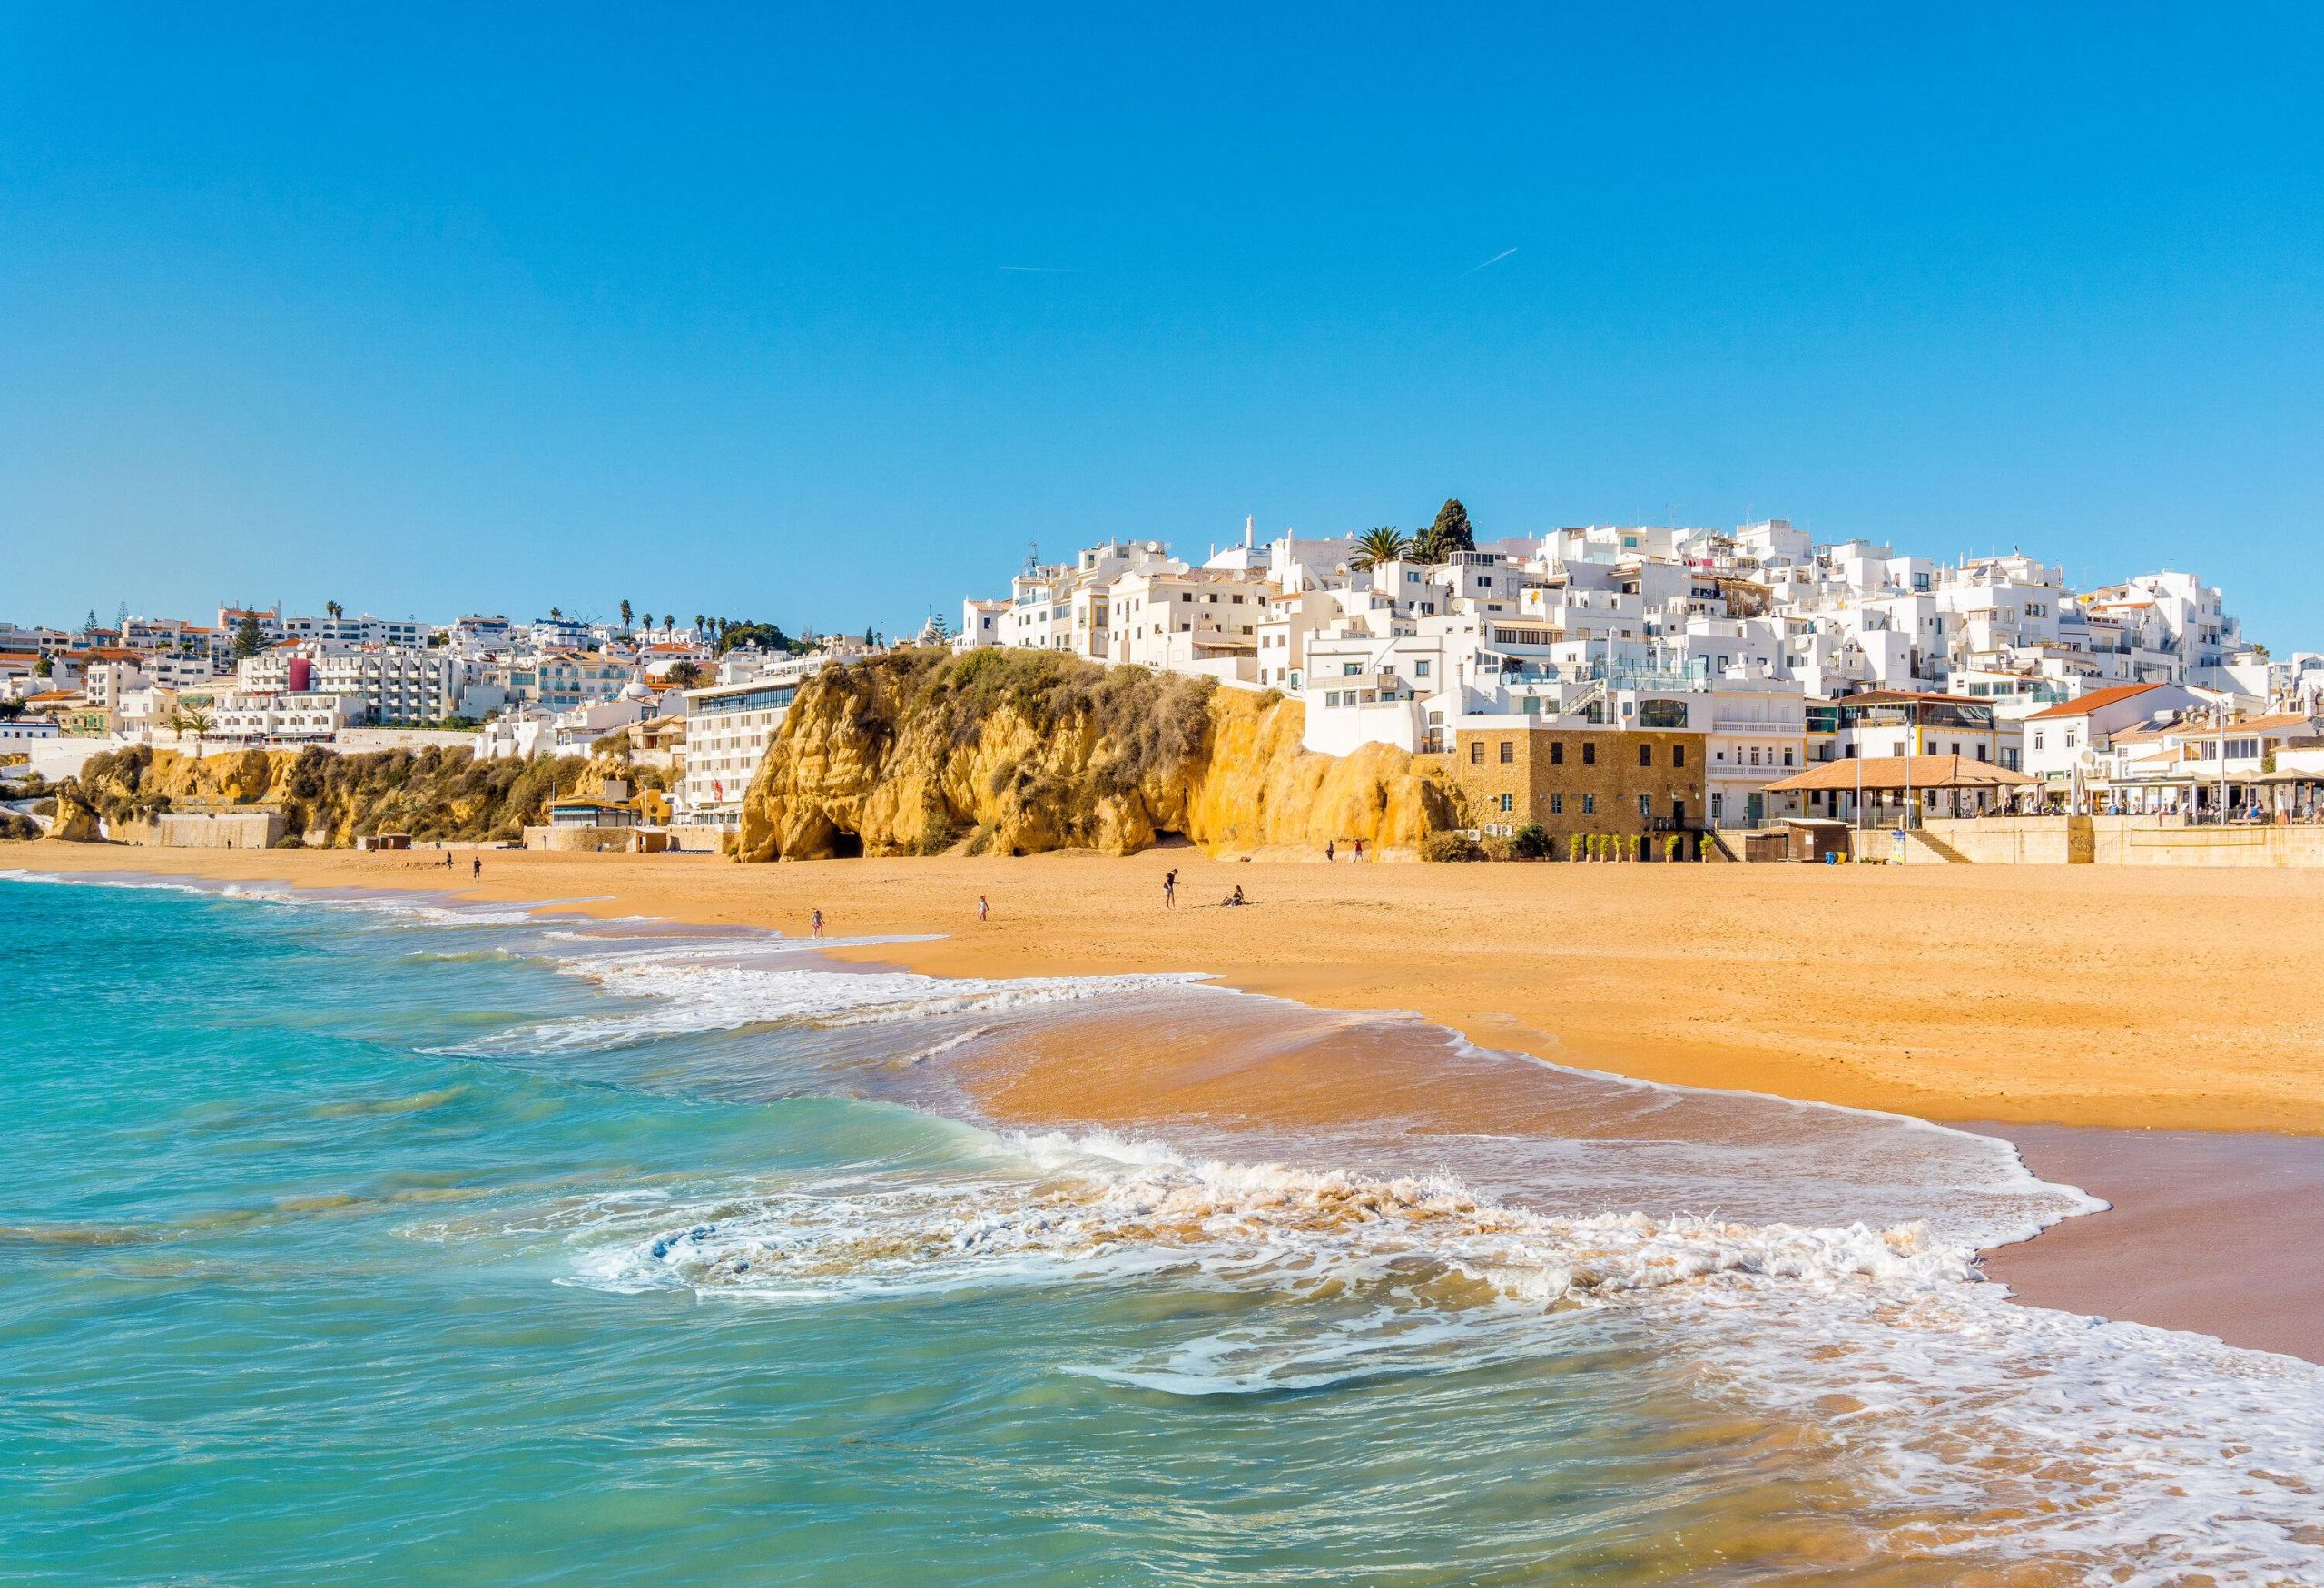 A sandy beach lined with white houses and buildings against a clear blue sky.